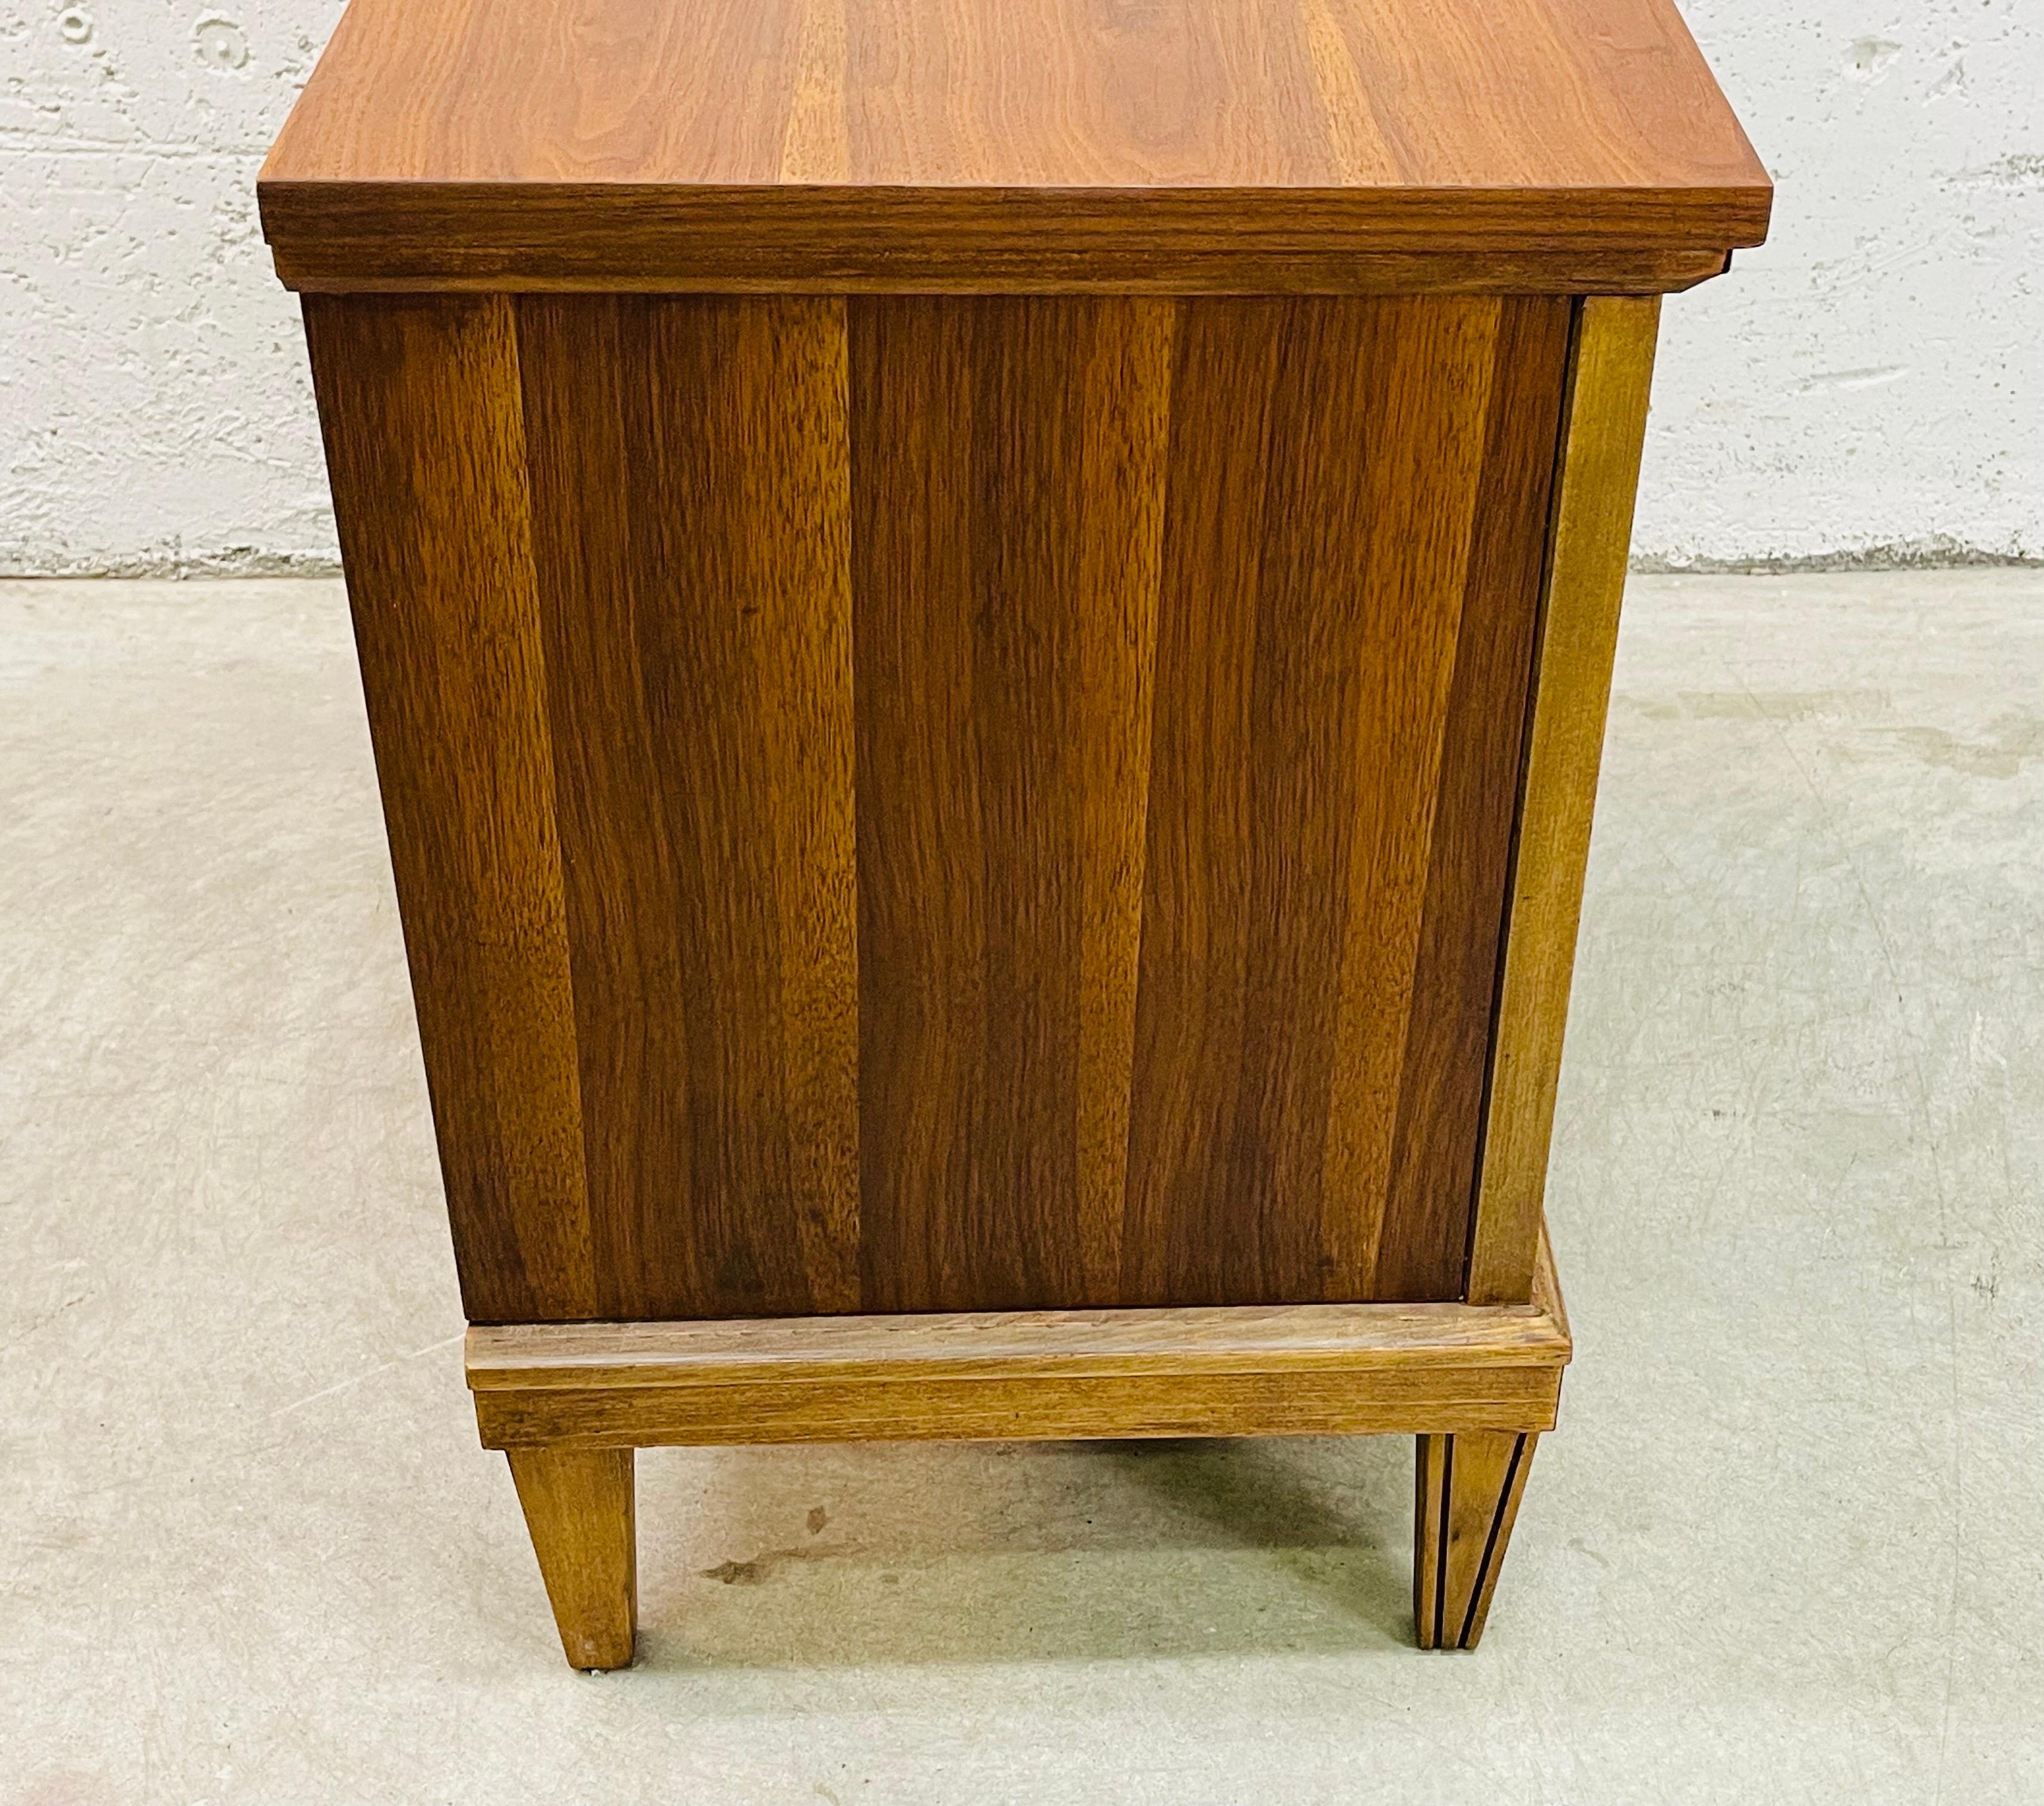 Vintage 1960s walnut and maple wood two drawer bedroom nightstand. The nightstand has a beautiful walnut wood grain and the drawers are accented with maple wood. Newly refinished condition. Marked with a label inside.